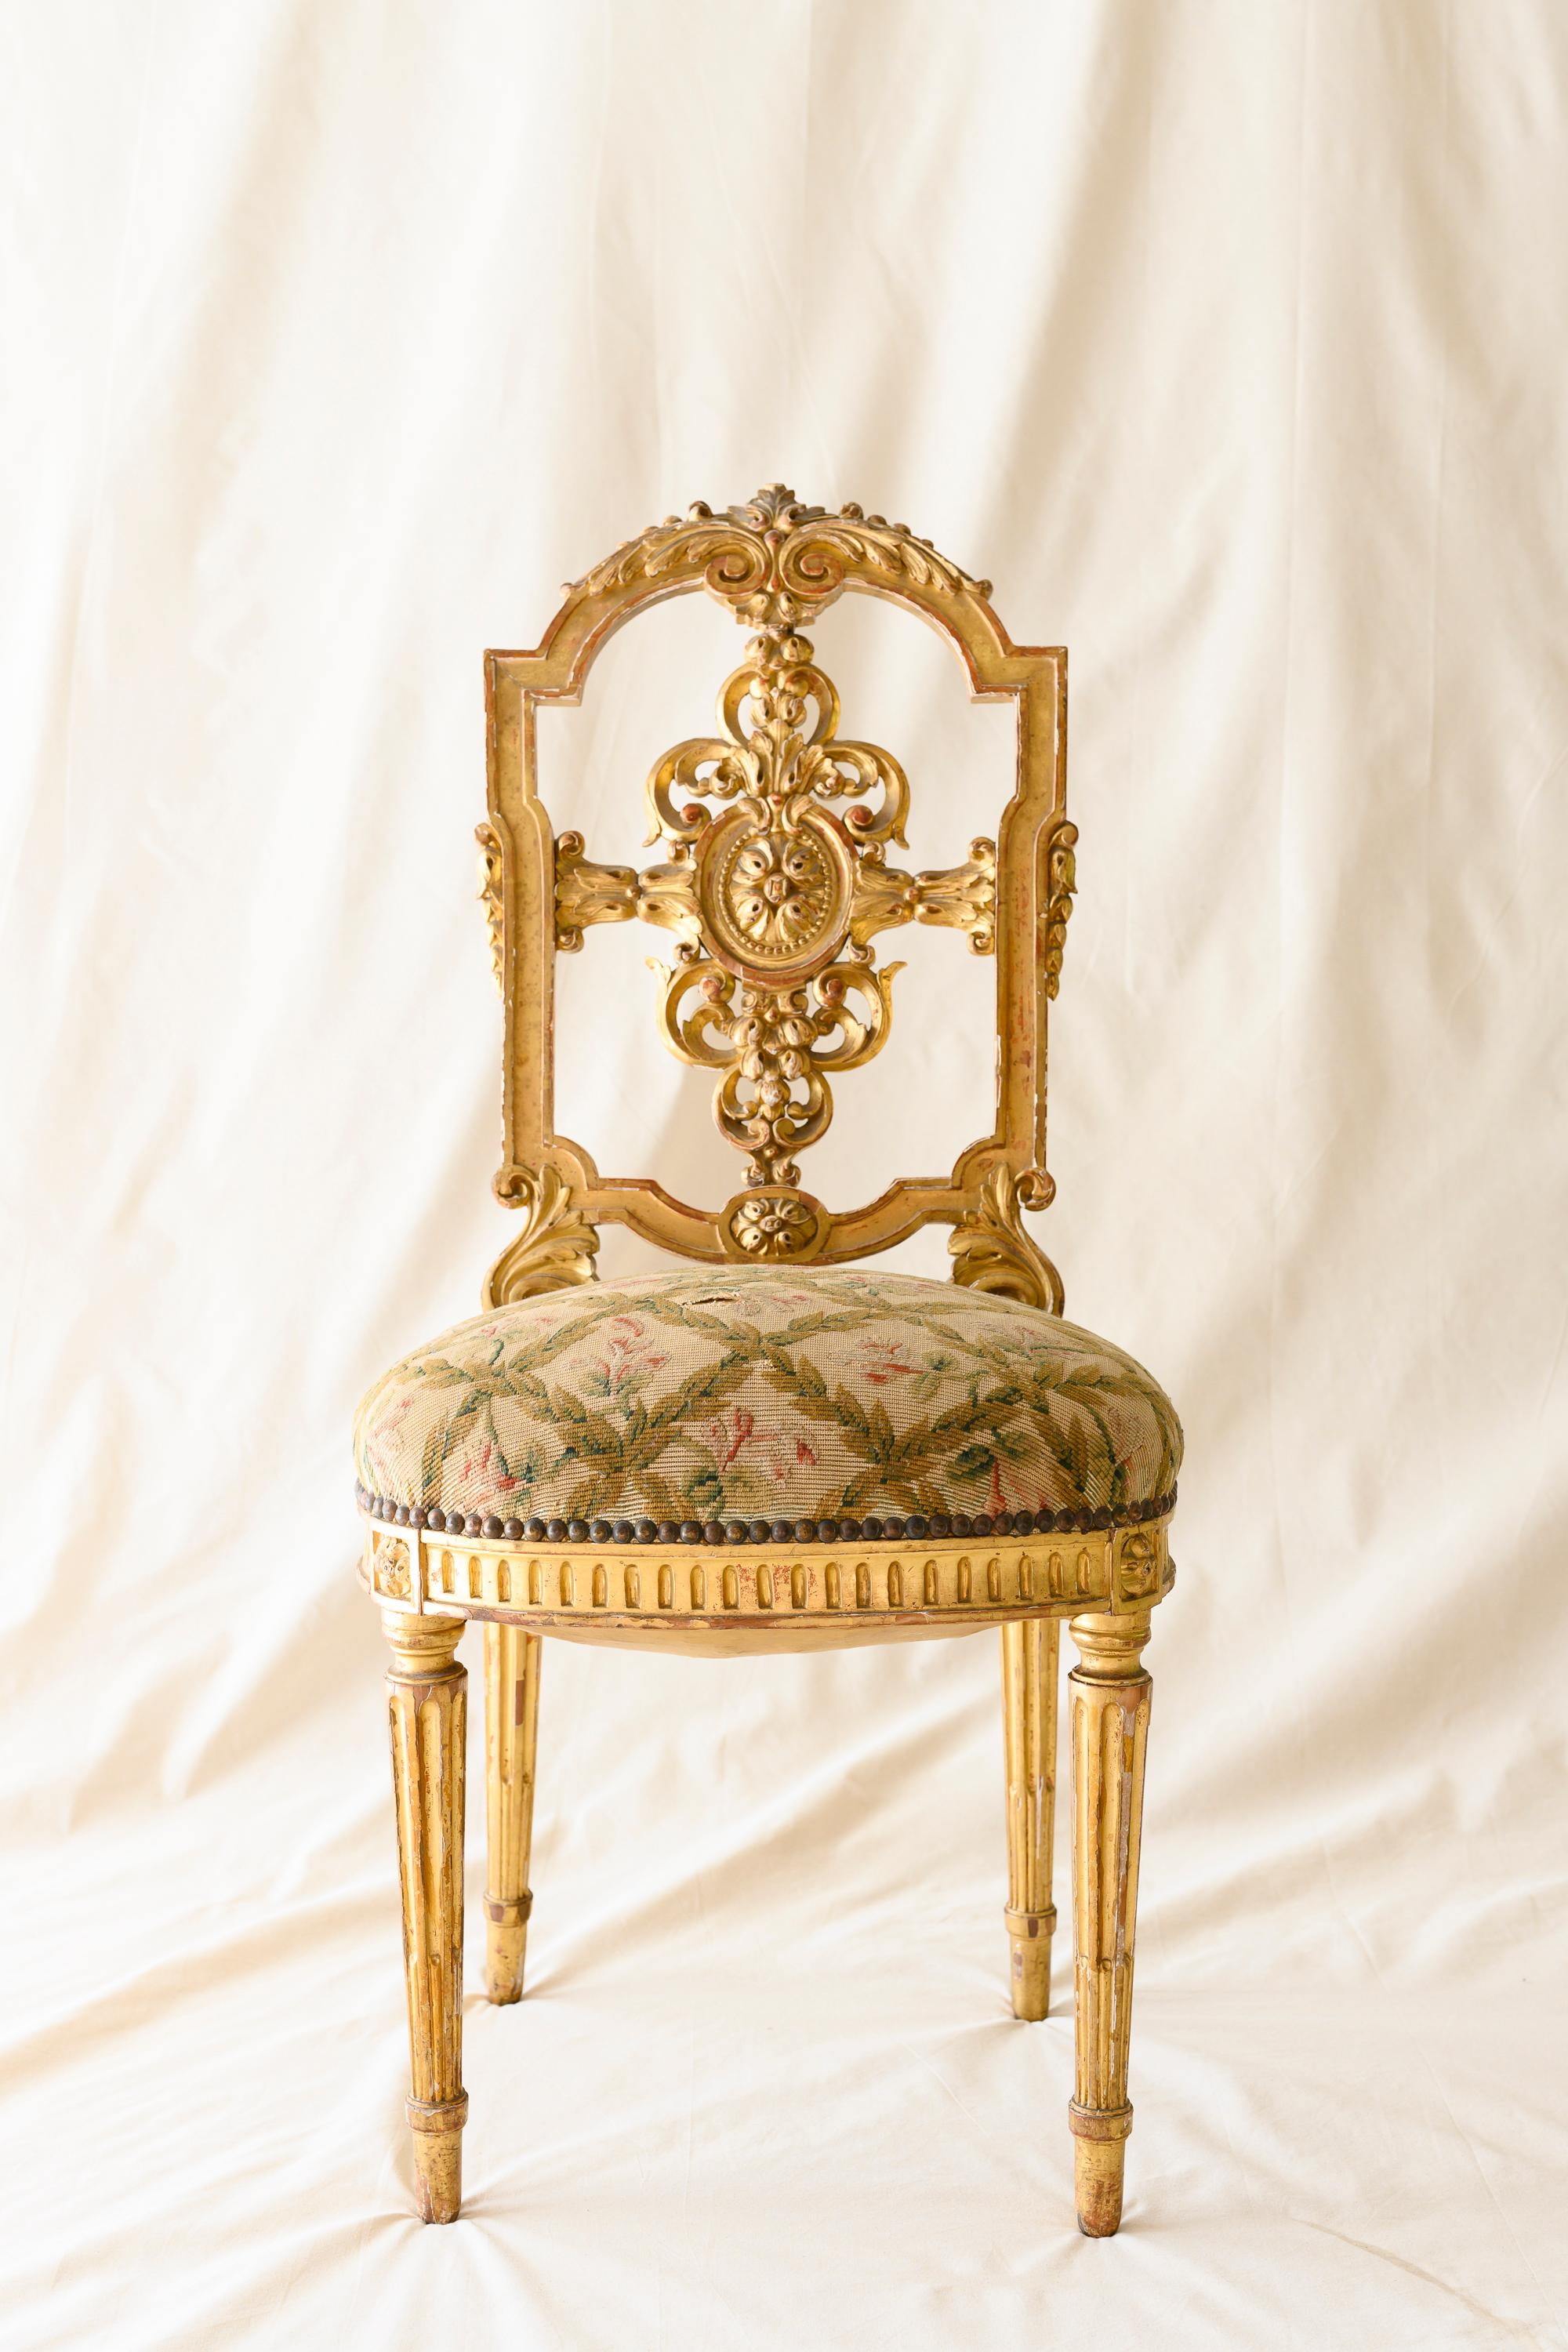 Suite of four Louis XVI giltwood chairs in the style of Versailles. Each boasts a delicately carved splat with a rosette medallion surrounded by intricate foliage on a shield- shaped backrest, with a curved molded top rail carved with two resting